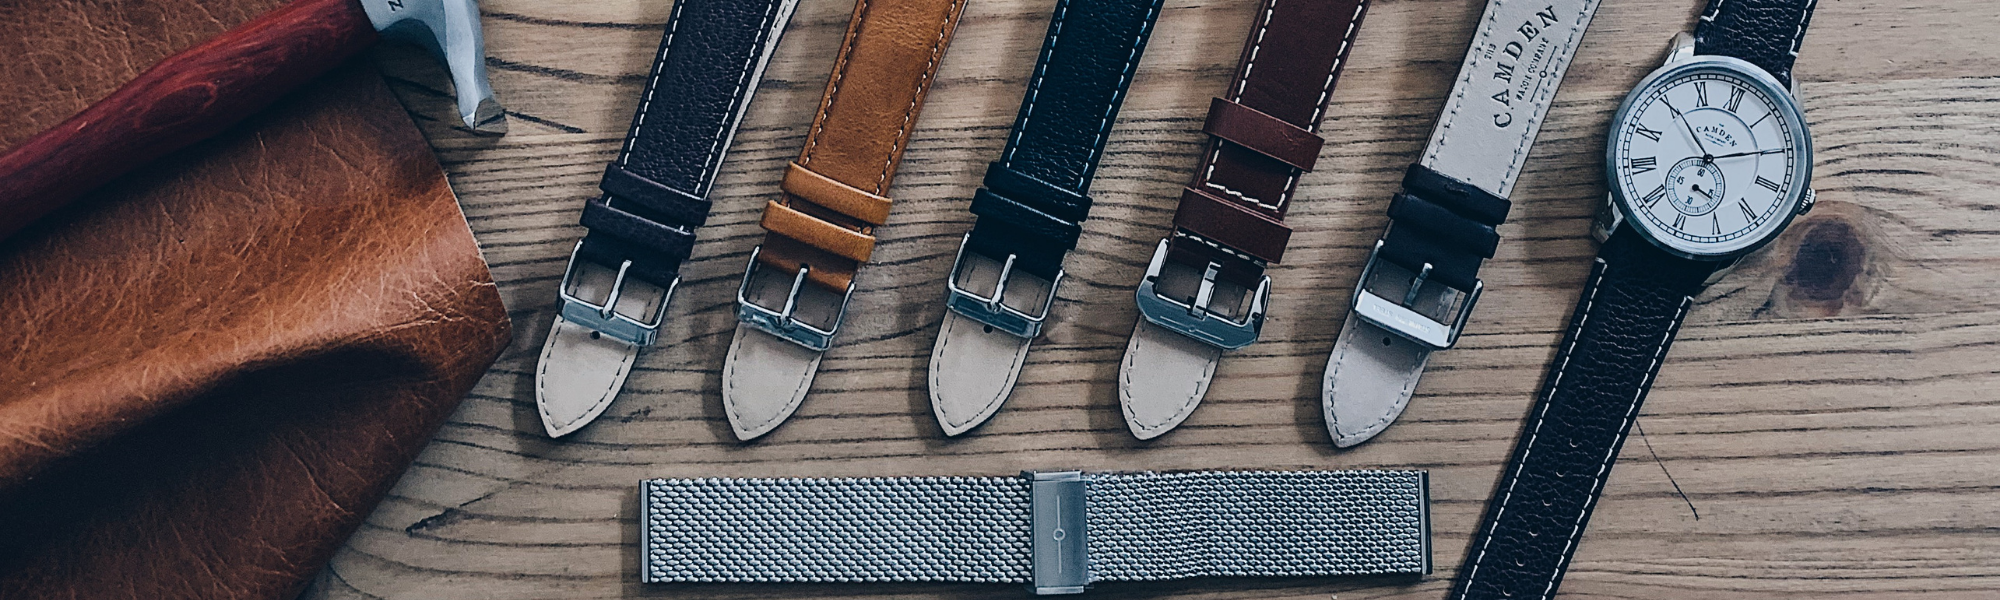 Leather and Nato straps for your No. 29 Camden Watch Company Watch